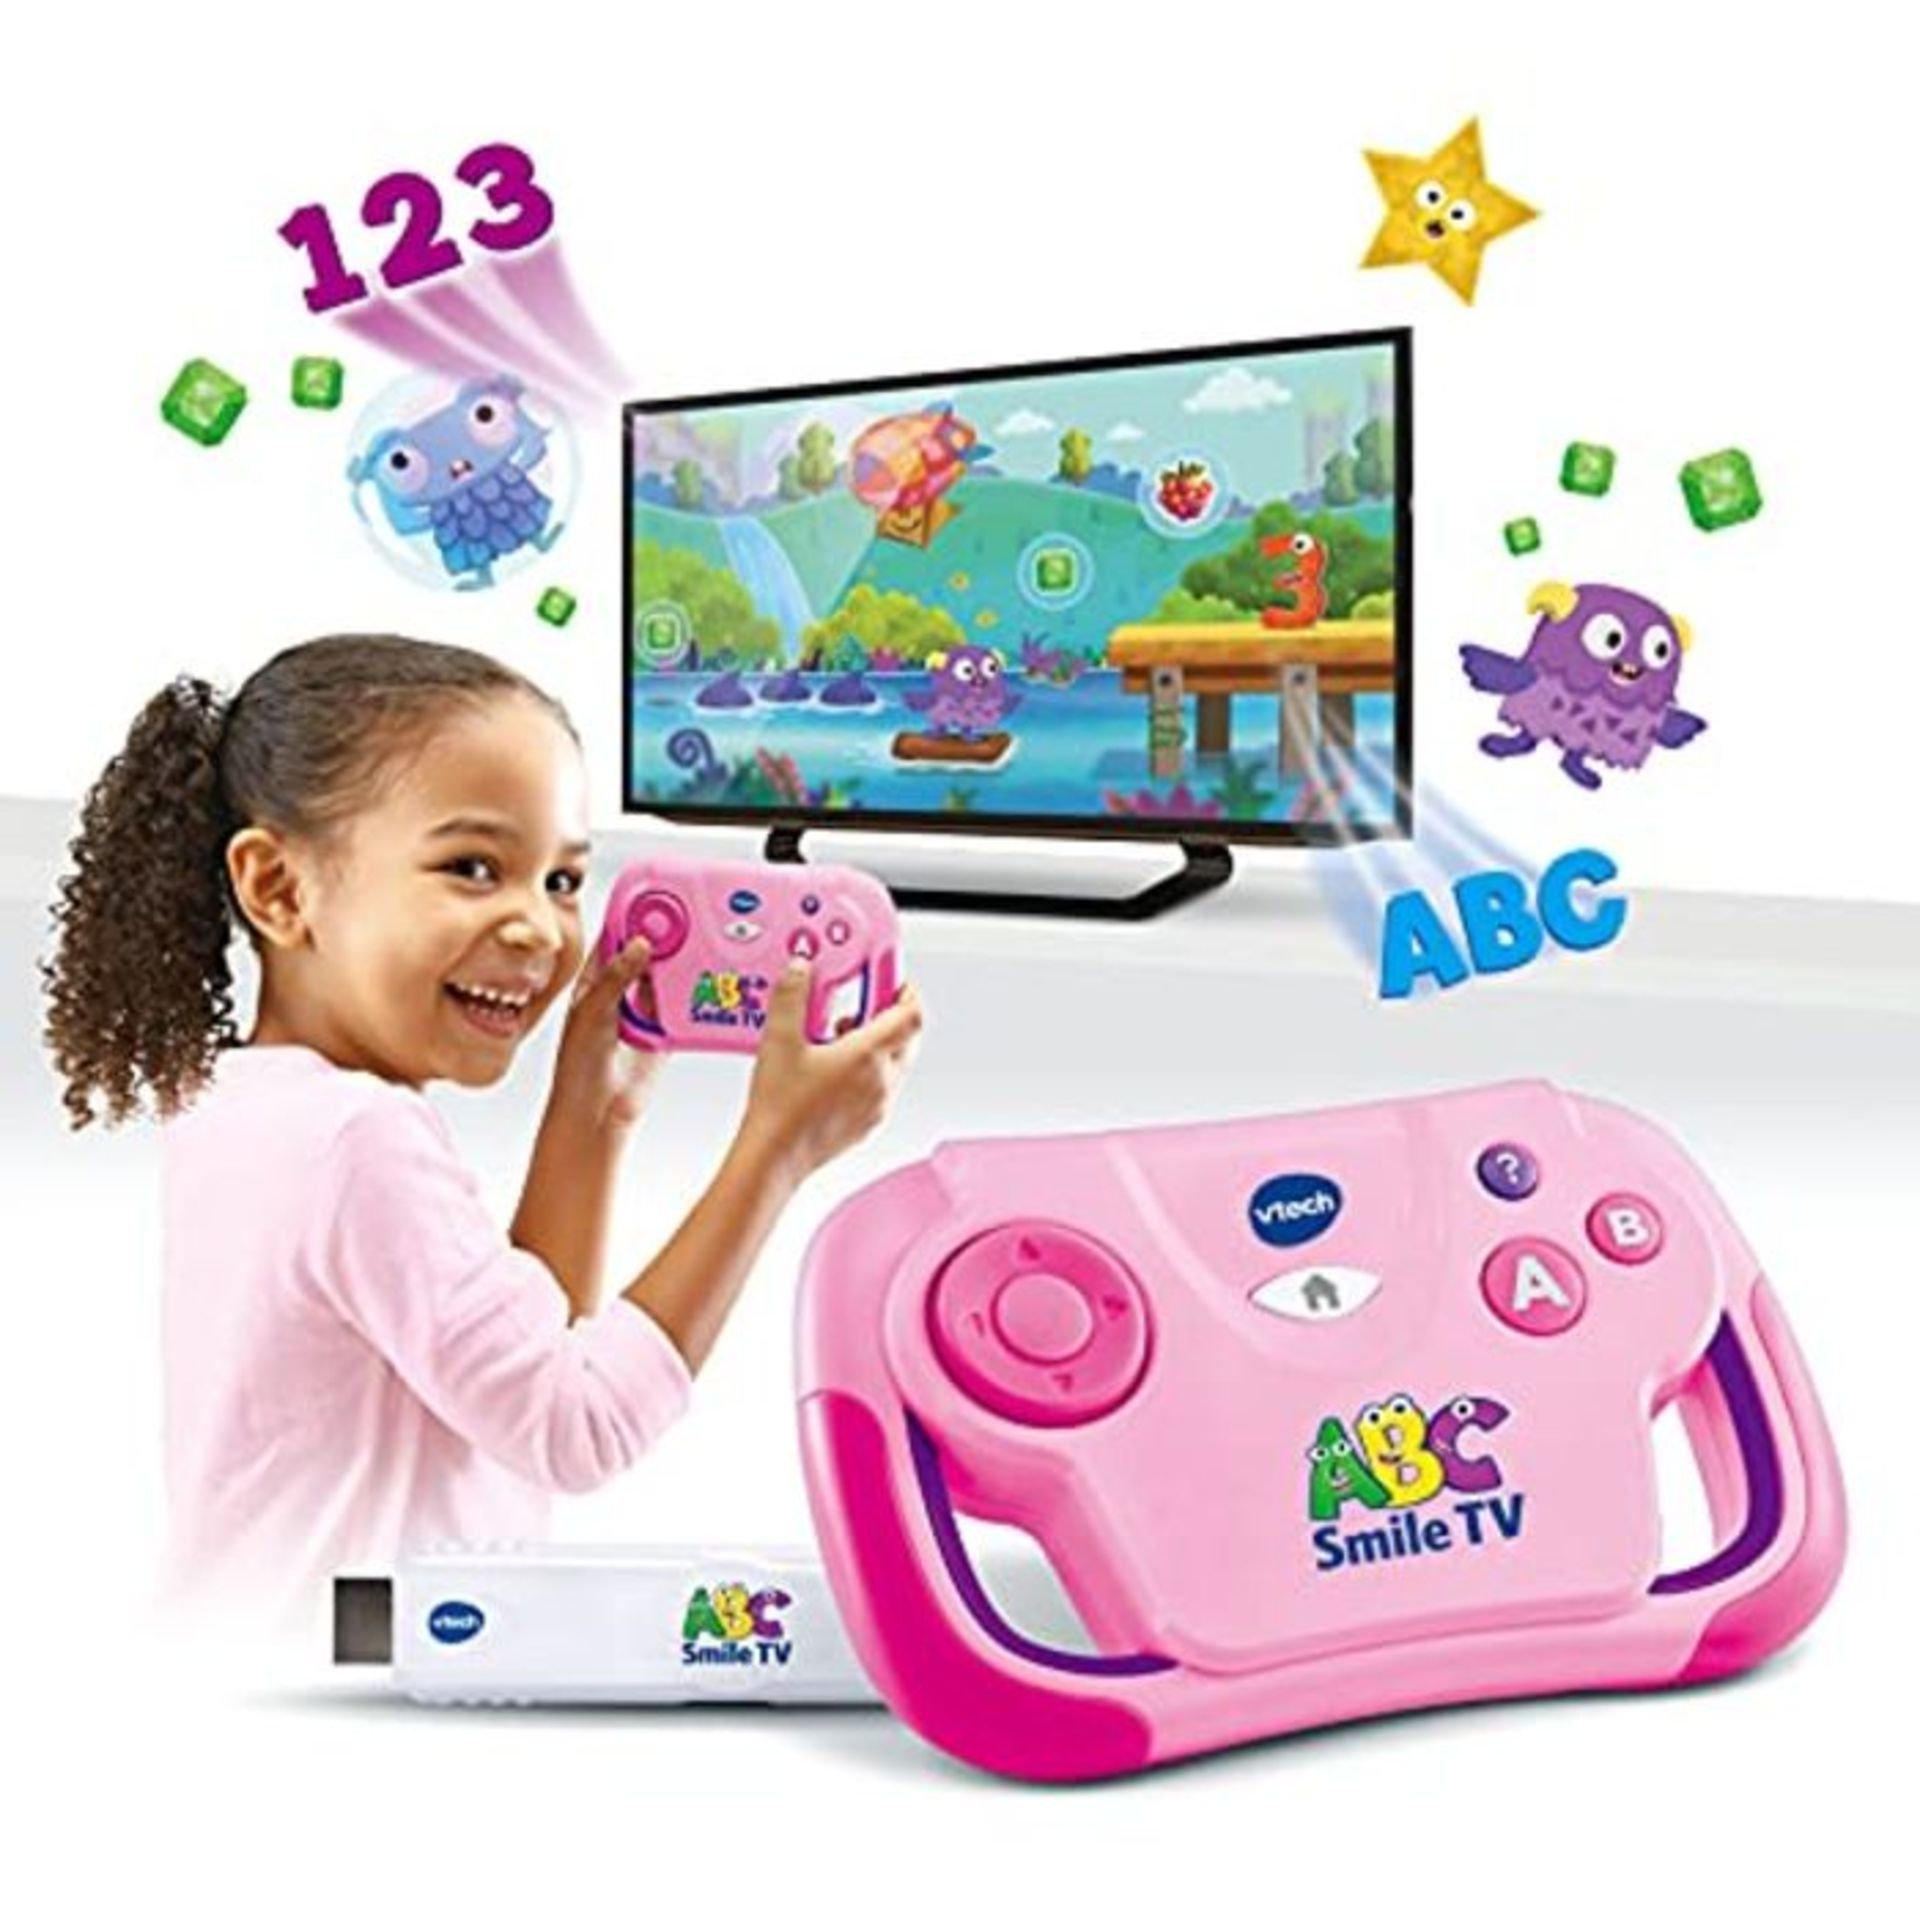 VTech 80-613254 ABC Smile TV pink Game Console